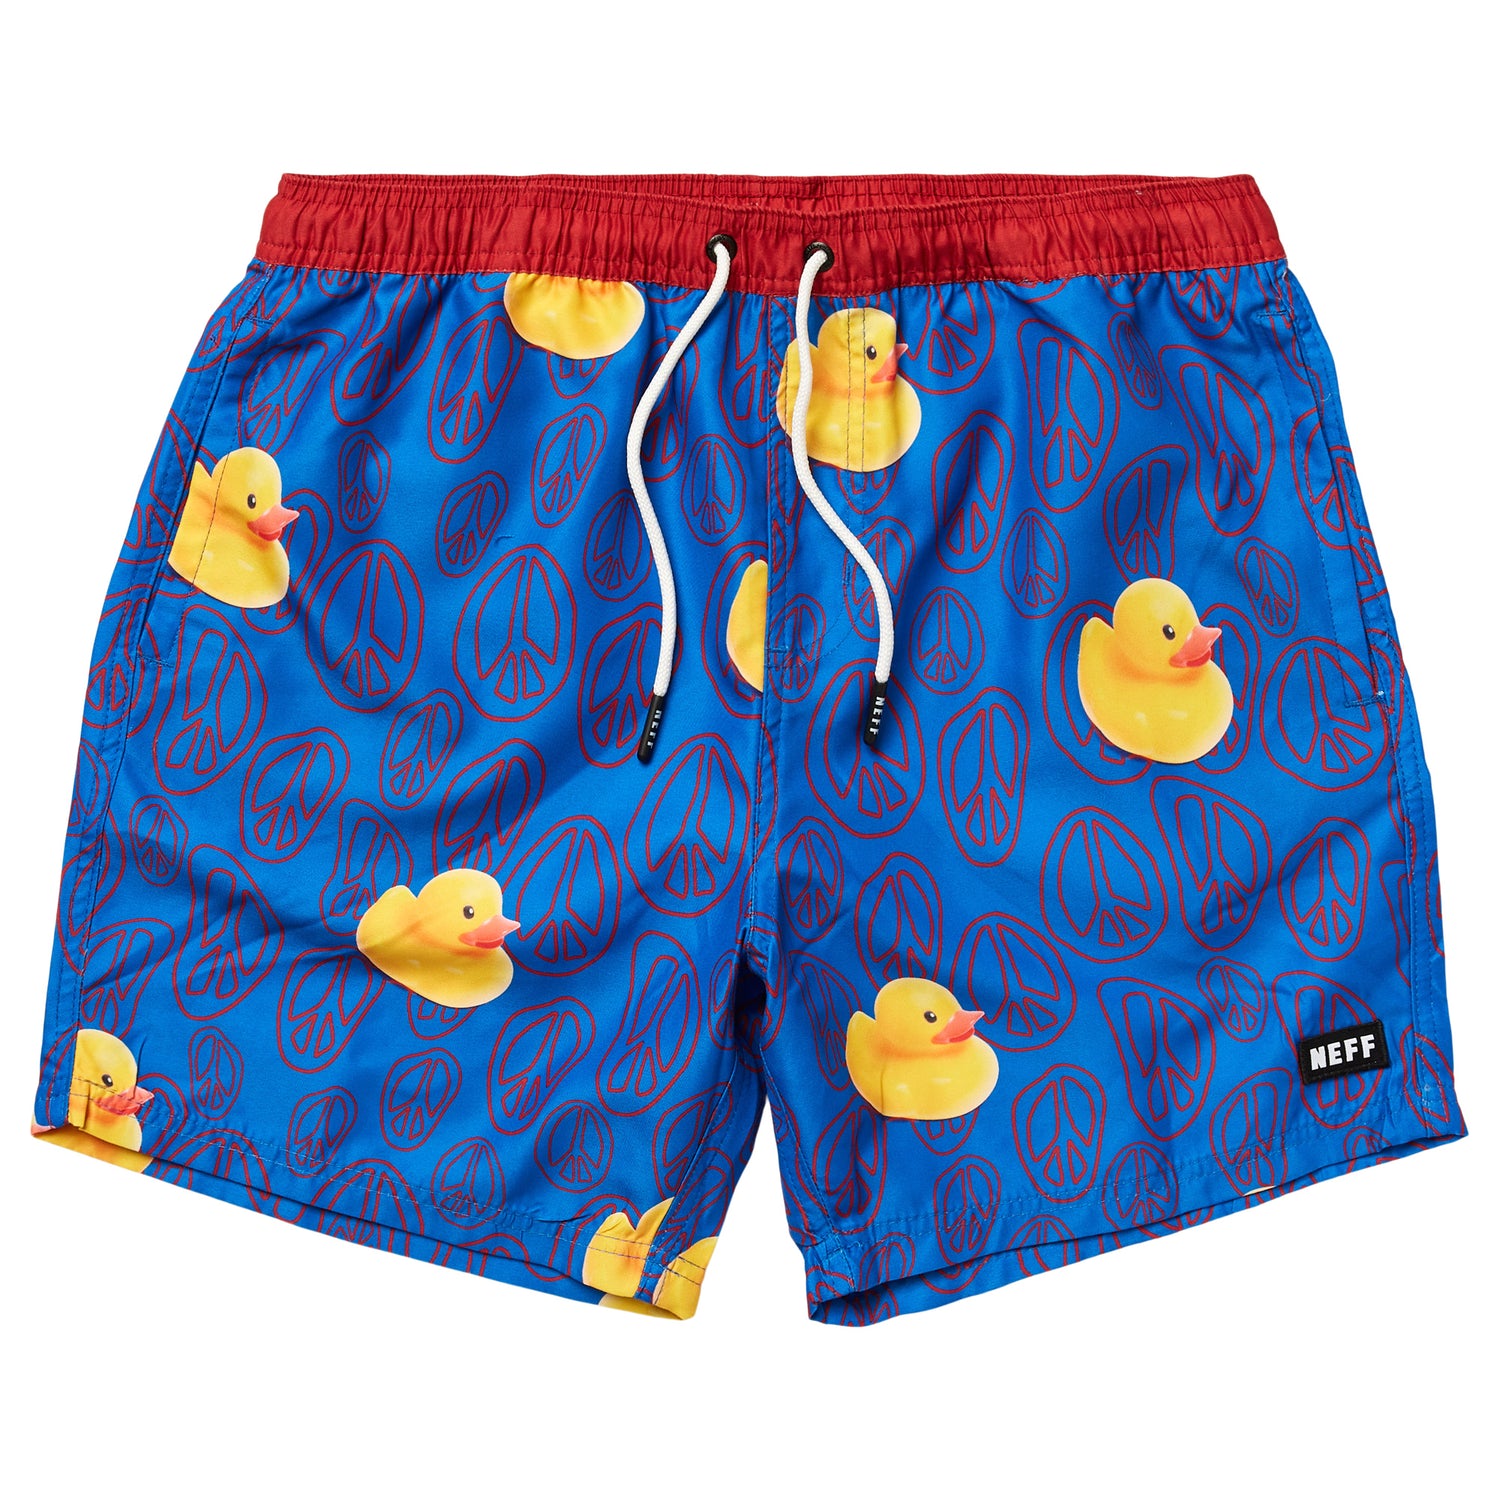 TWISTED PEACE DUCKY 15" HOT TUB VOLLEY SHORTS - BLUE